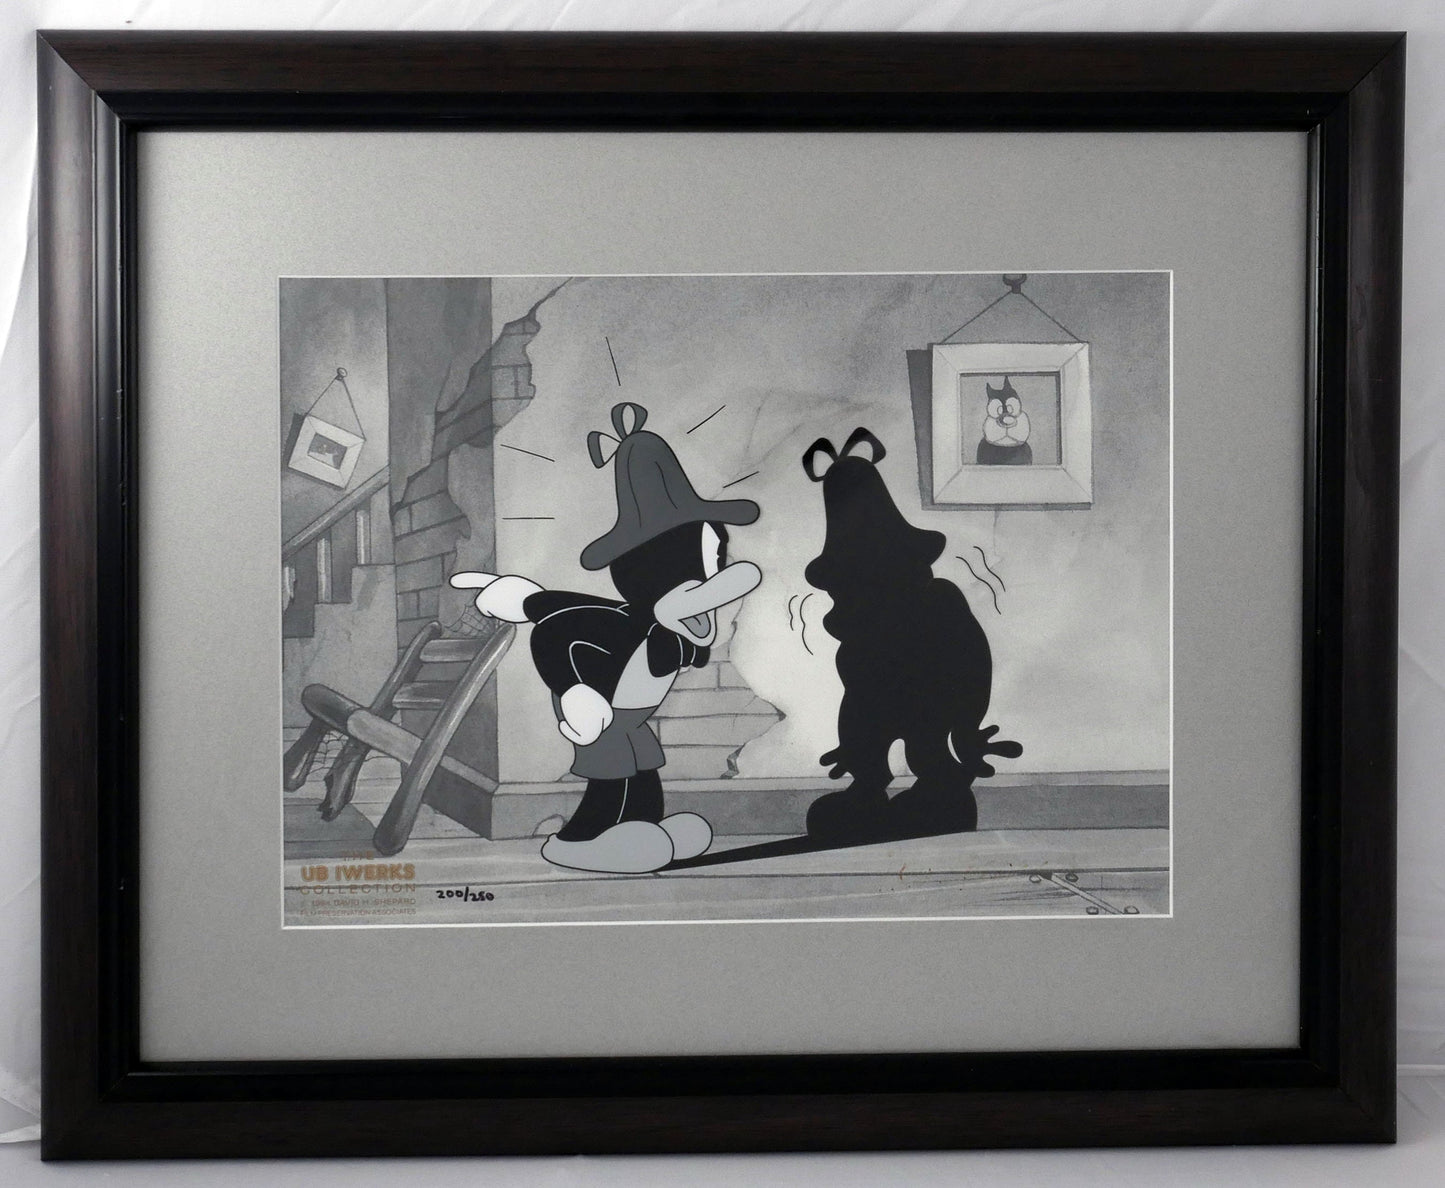 Ub Iwerks Collection Flip the Frog Cuckoo Murder Case Hand-Painted Ltd Ed Animation Cel Framed 1994 200 out of 250